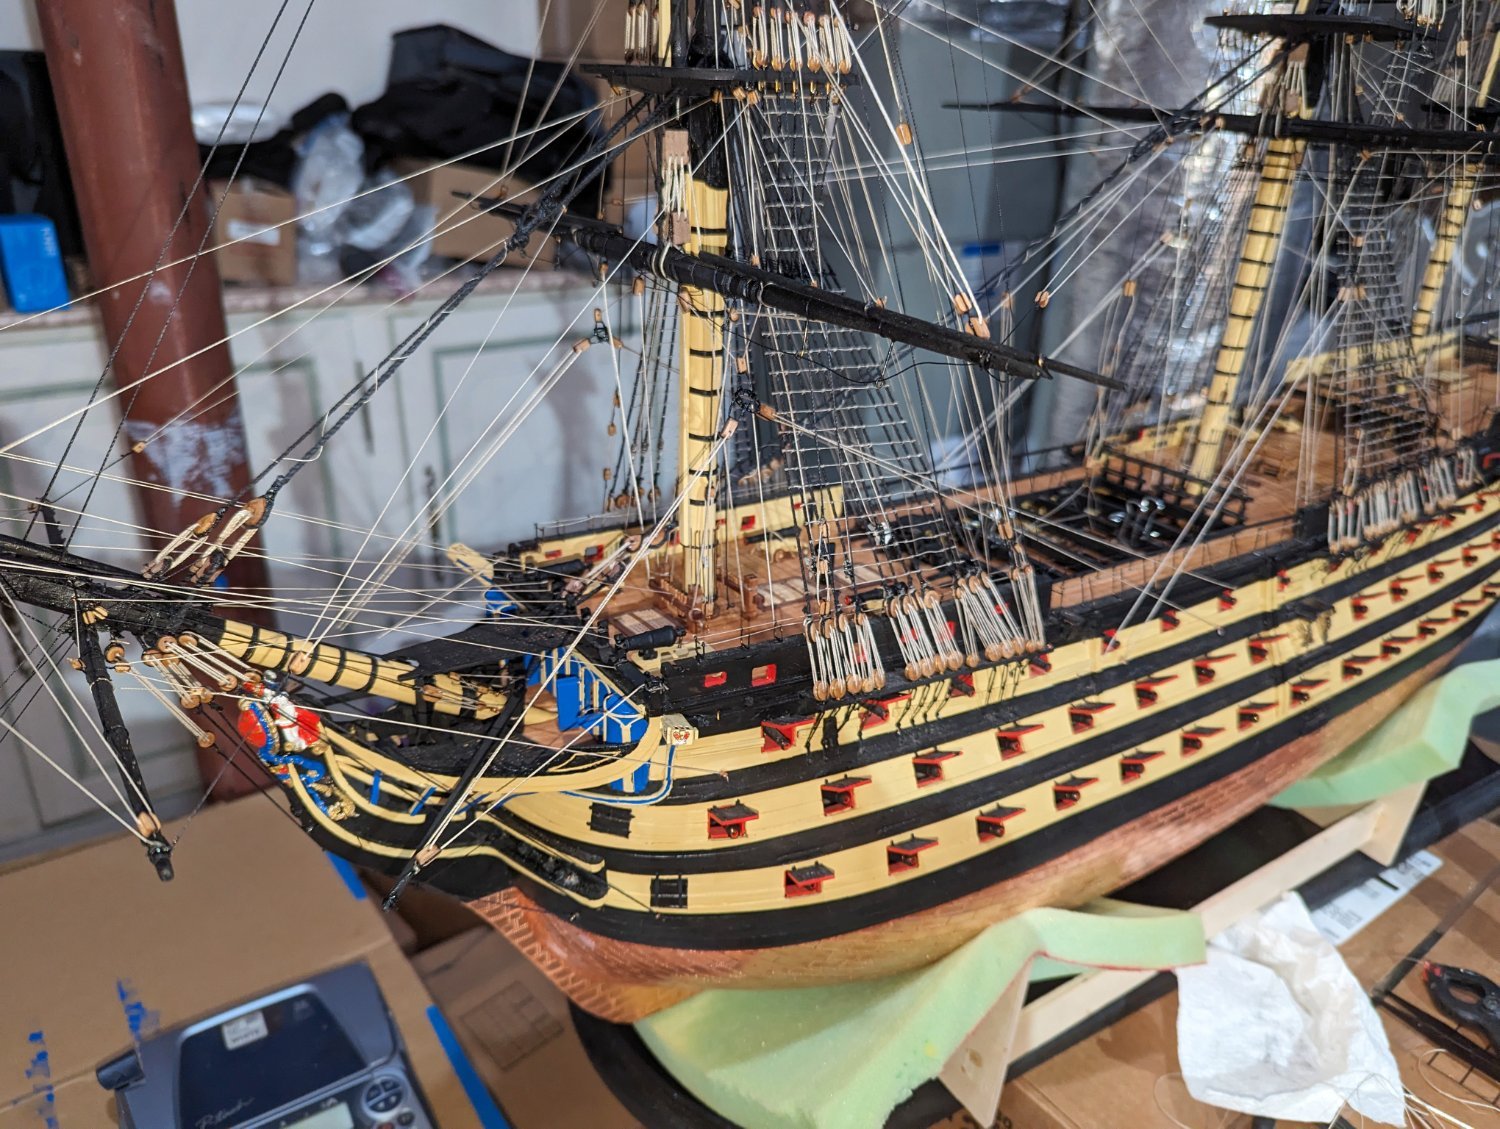 HMS Victory by drobinson02199 - FINISHED - Caldercraft - Scale 1